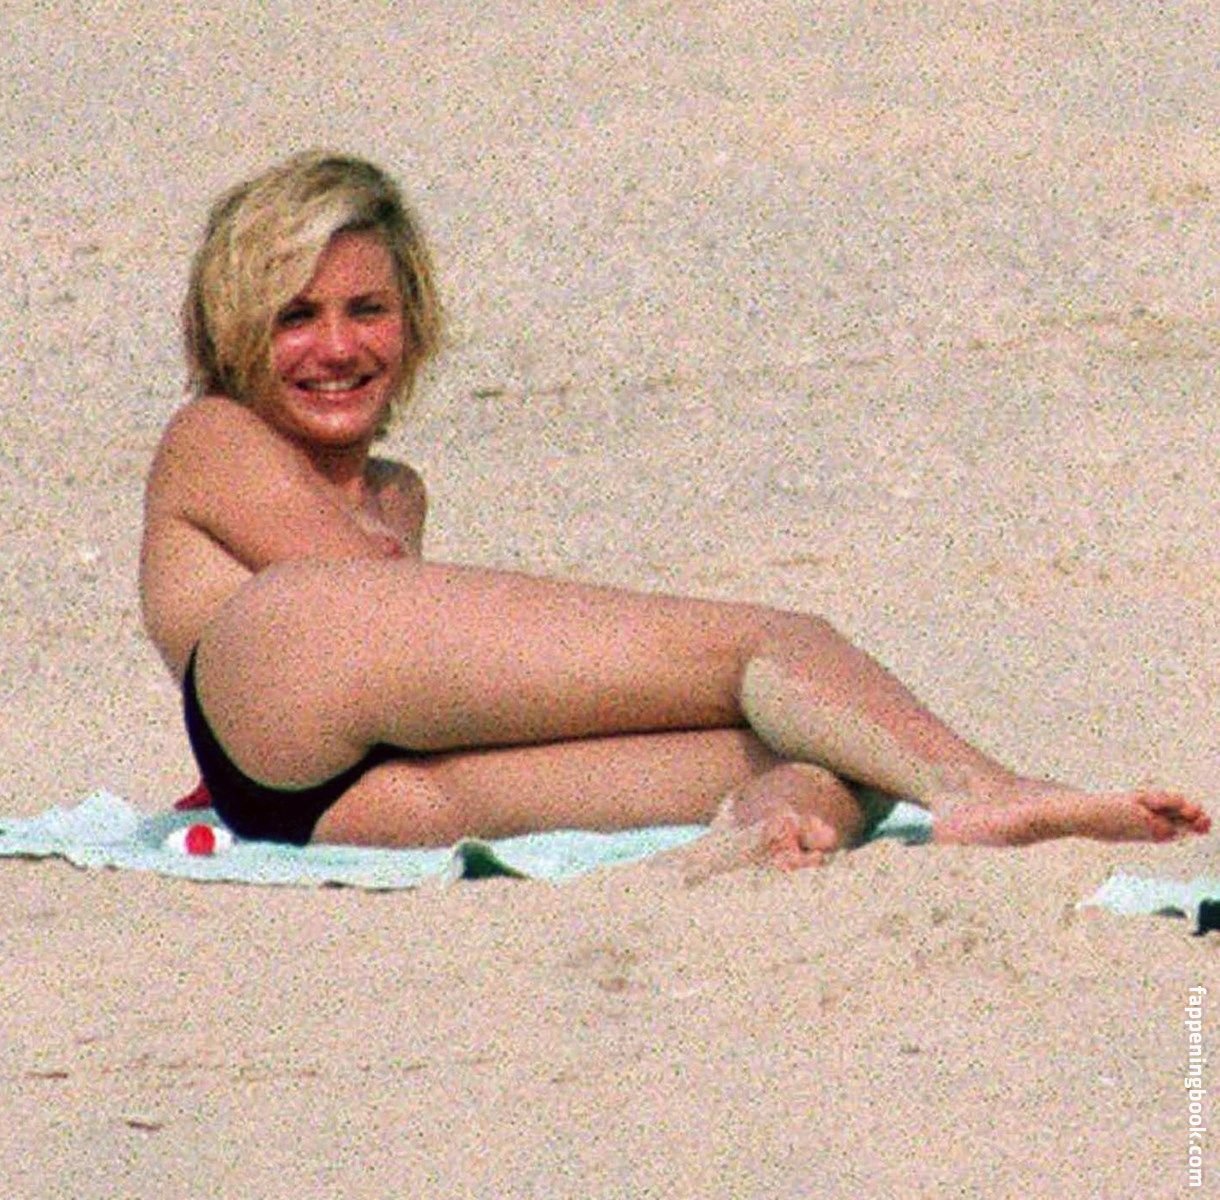 Cameron Diaz Nude, The Fappening - Photo #93058 - FappeningBook.